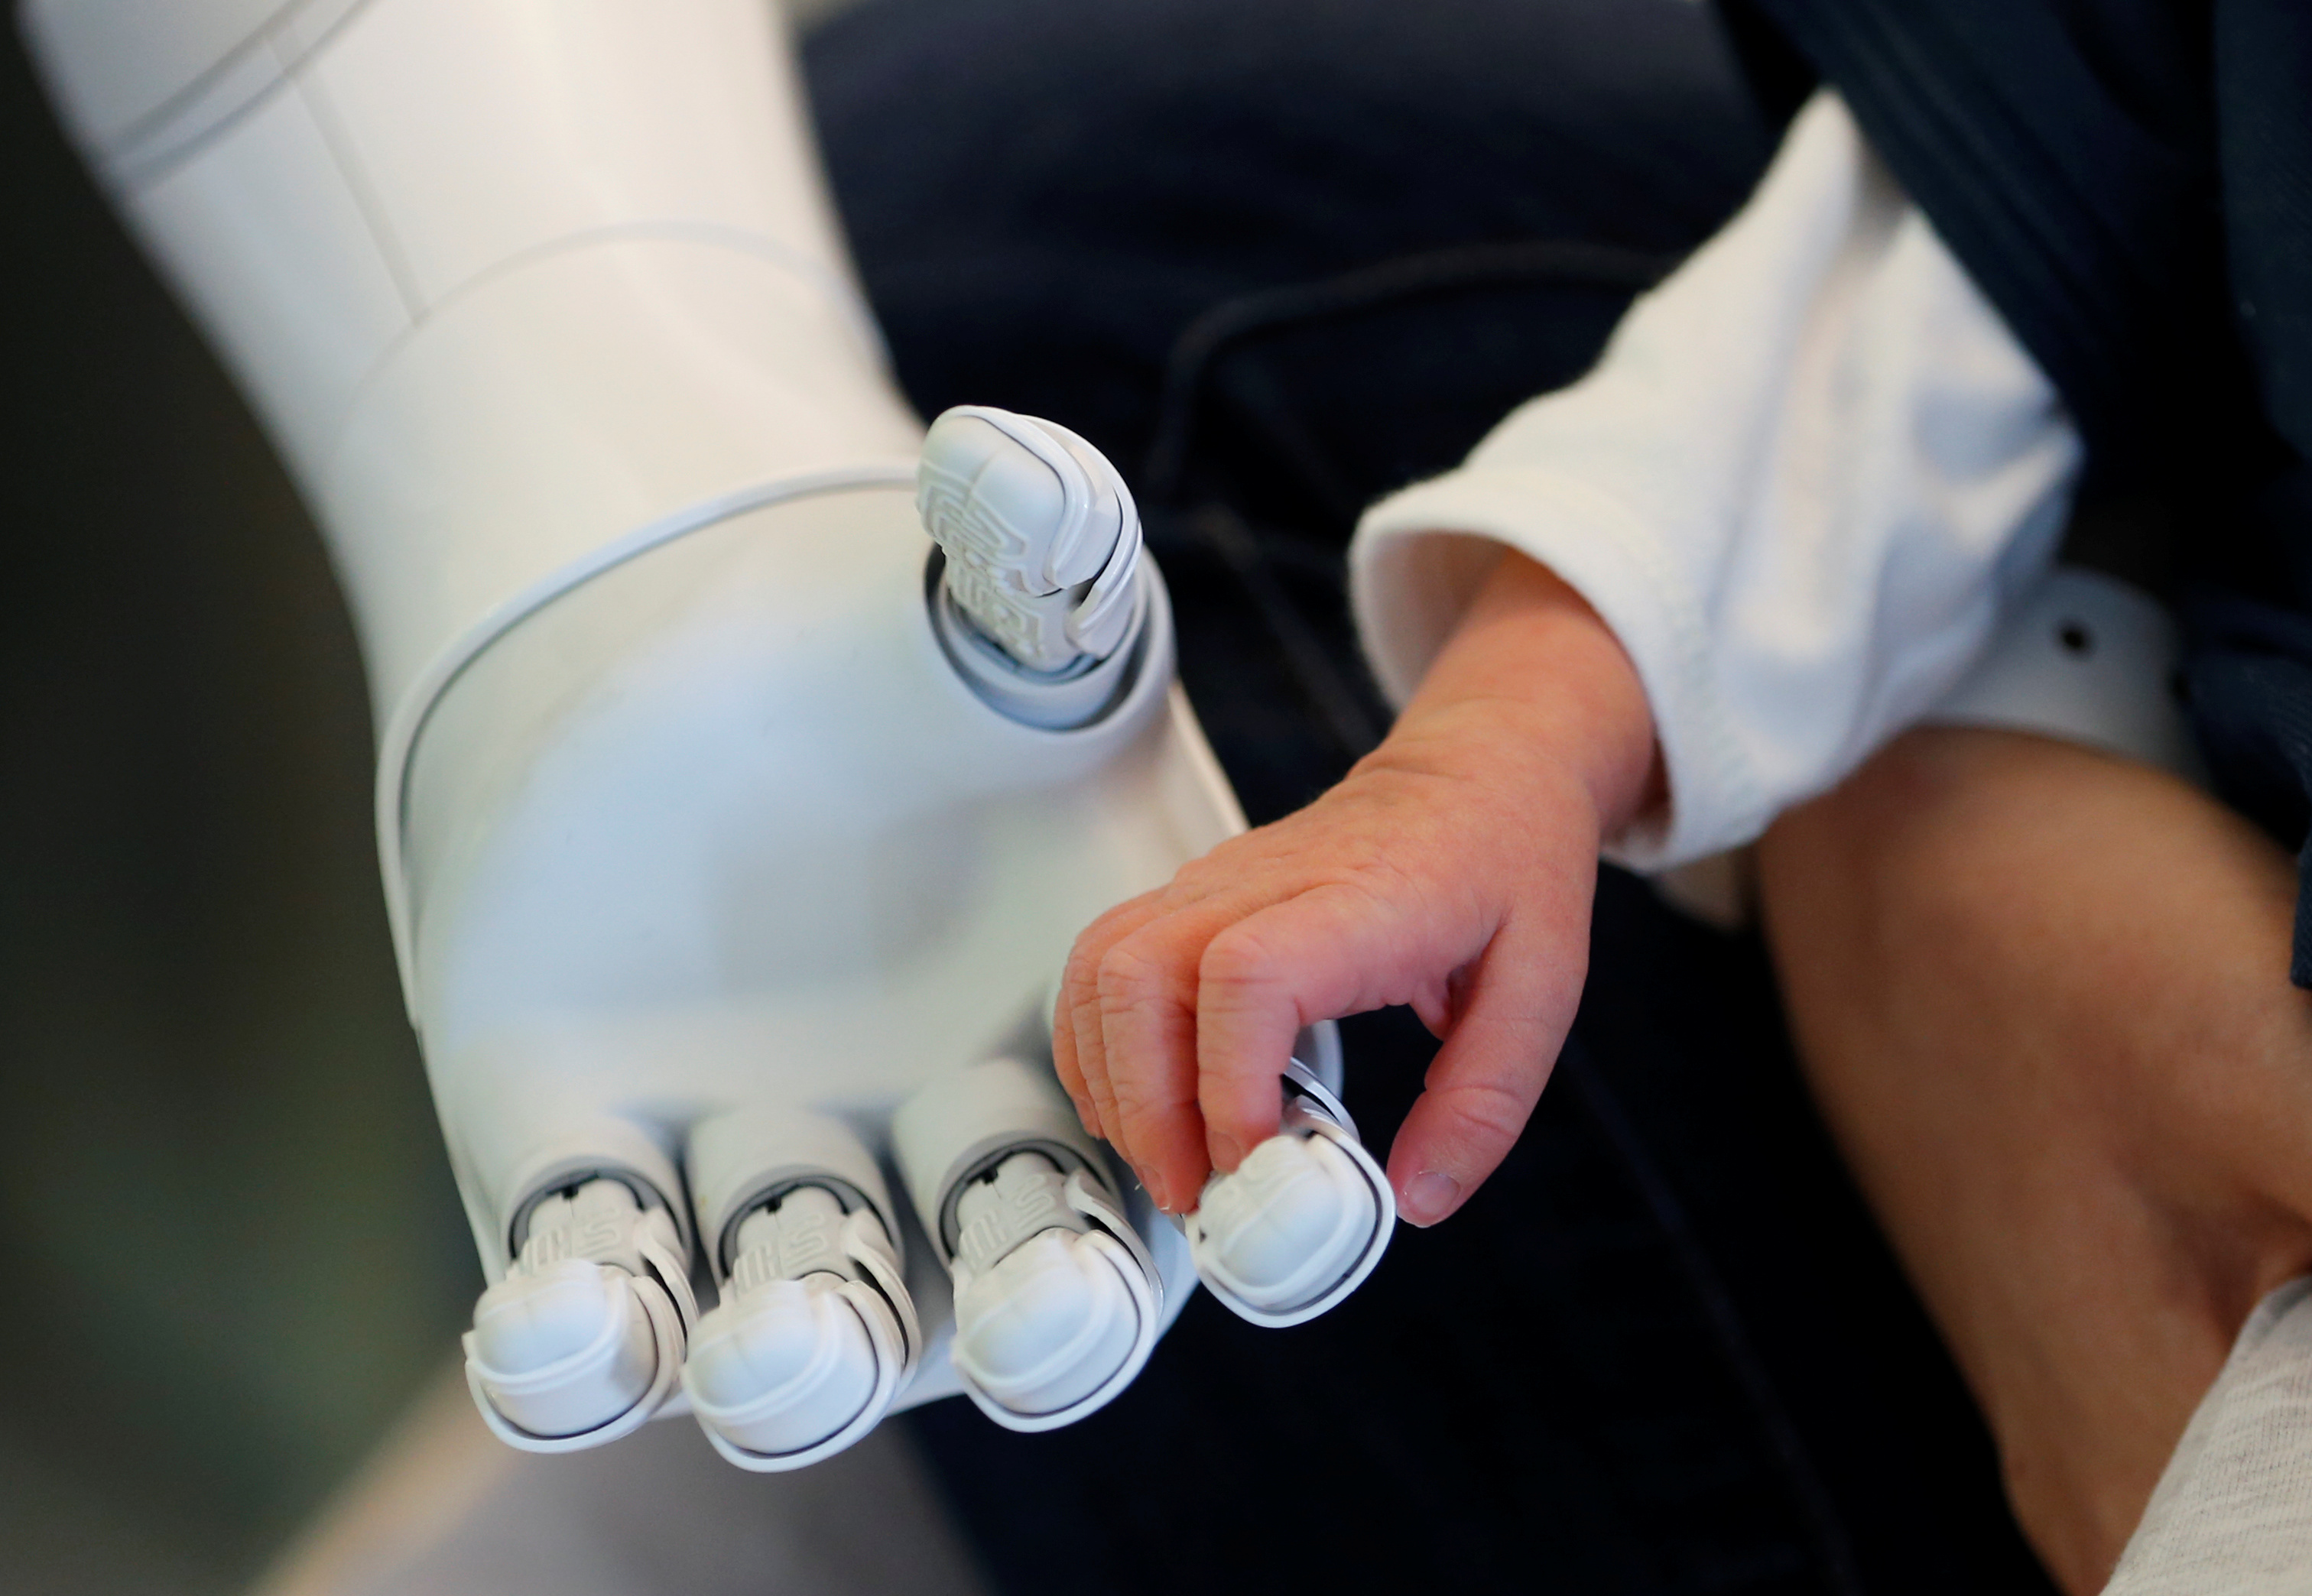 "Pepper" the robot holds the hand of a new born baby at AZ Damiaan hospital in Ostend,